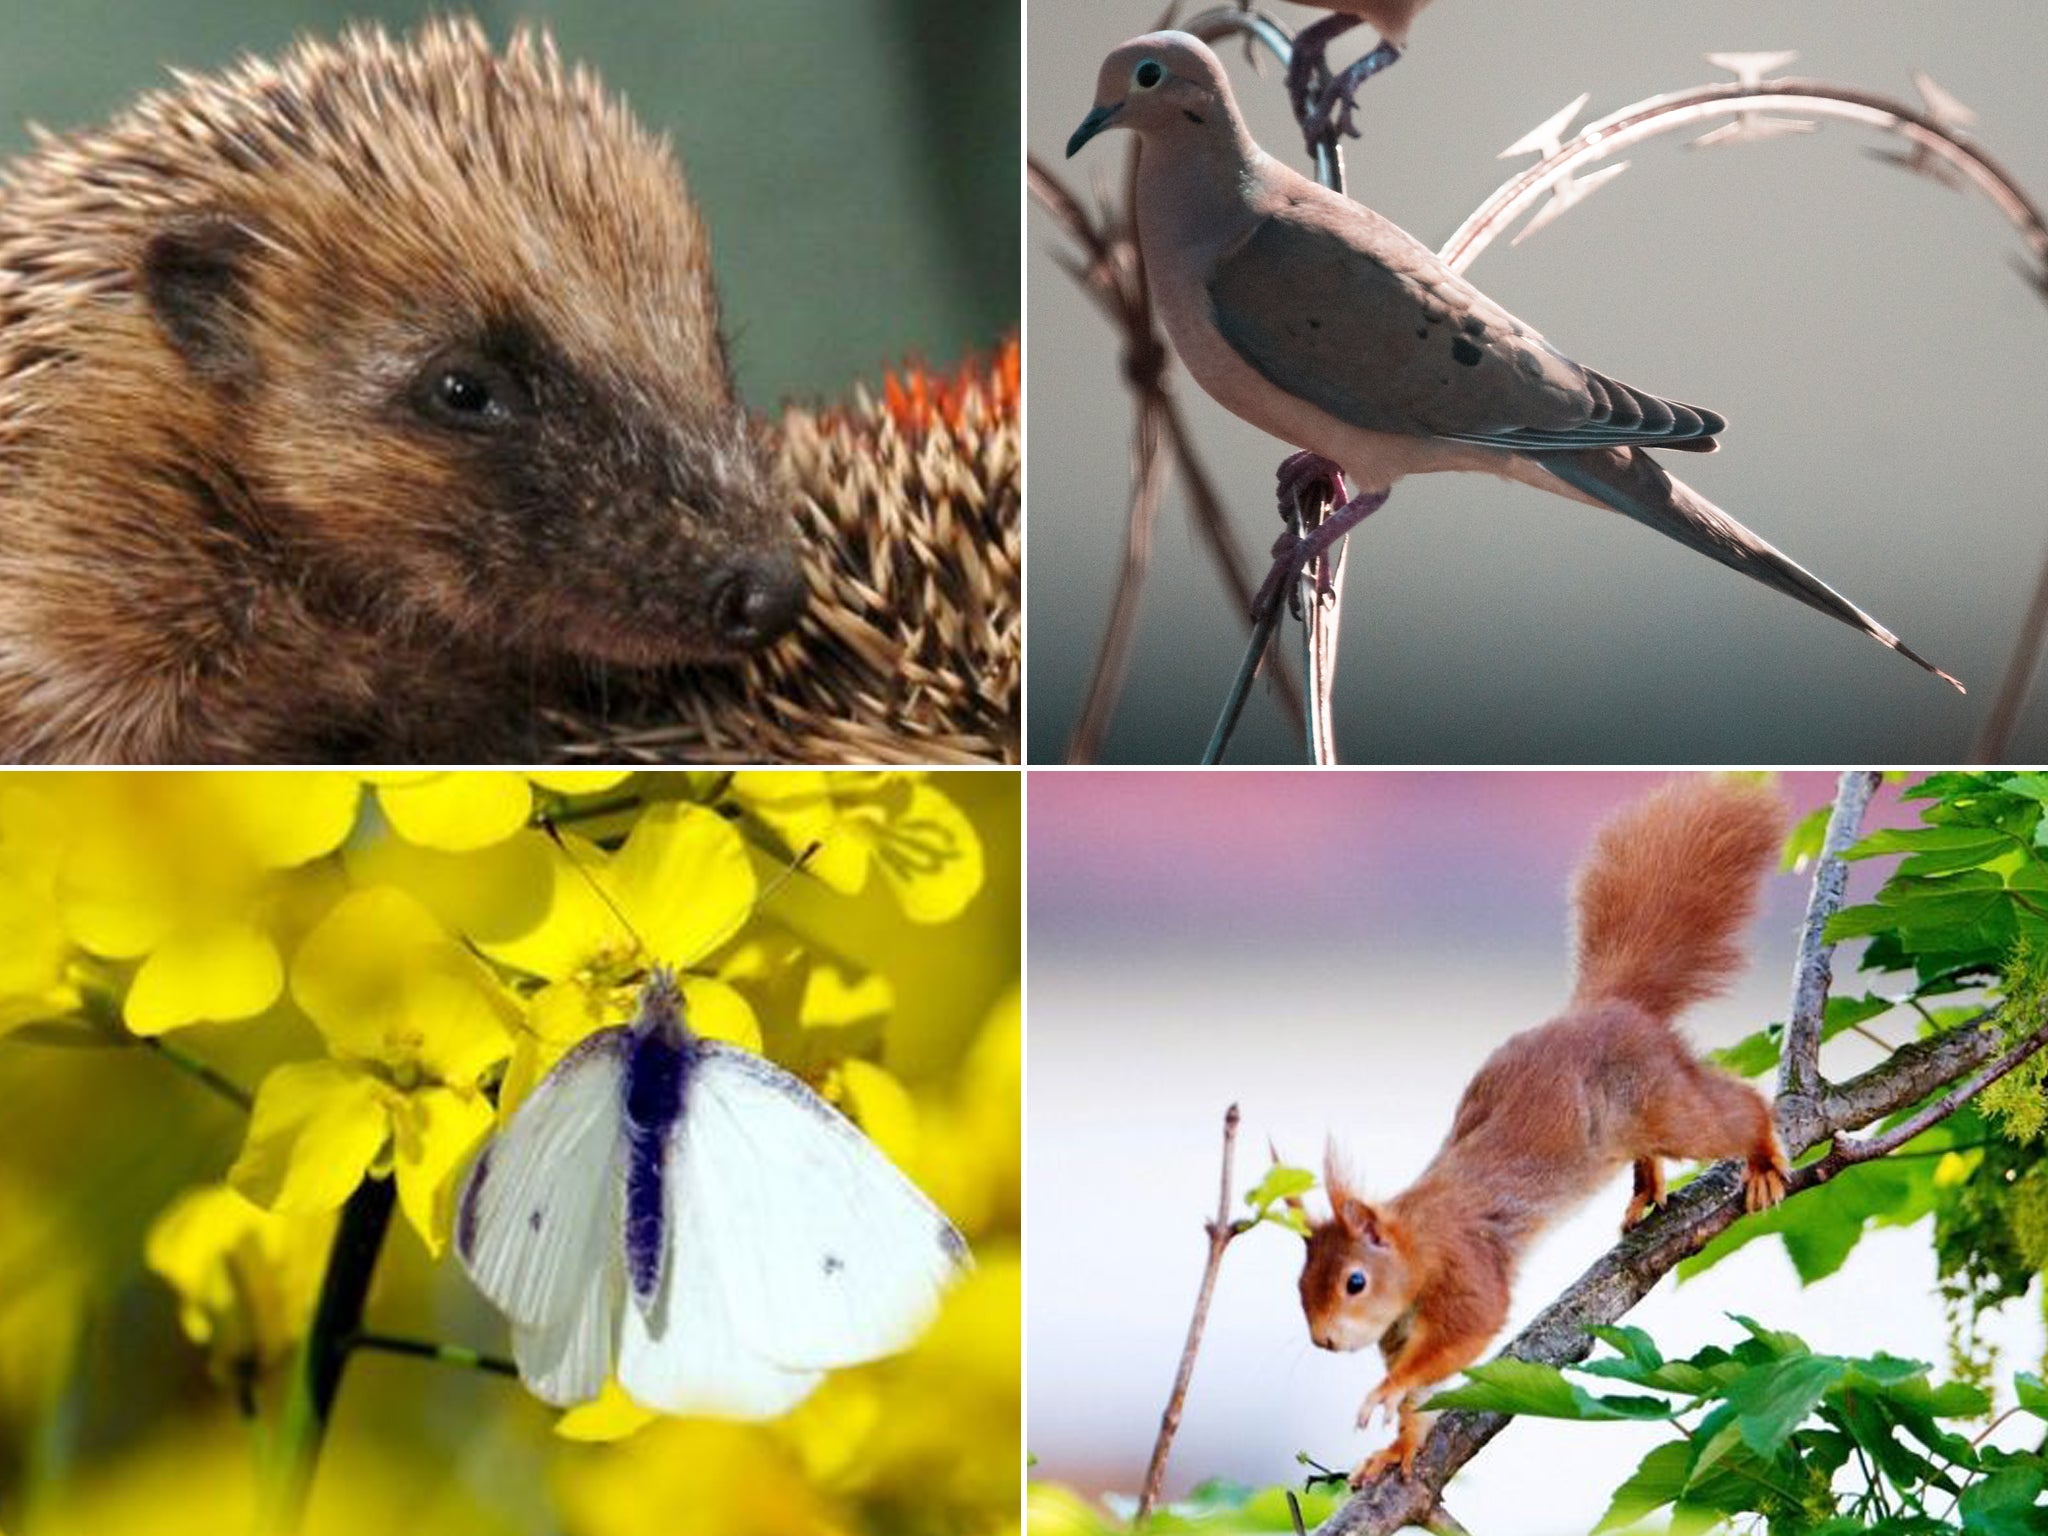 The report said hedgehogs, turtle doves, butterflies and red squirrels were all seeing declines in numbers